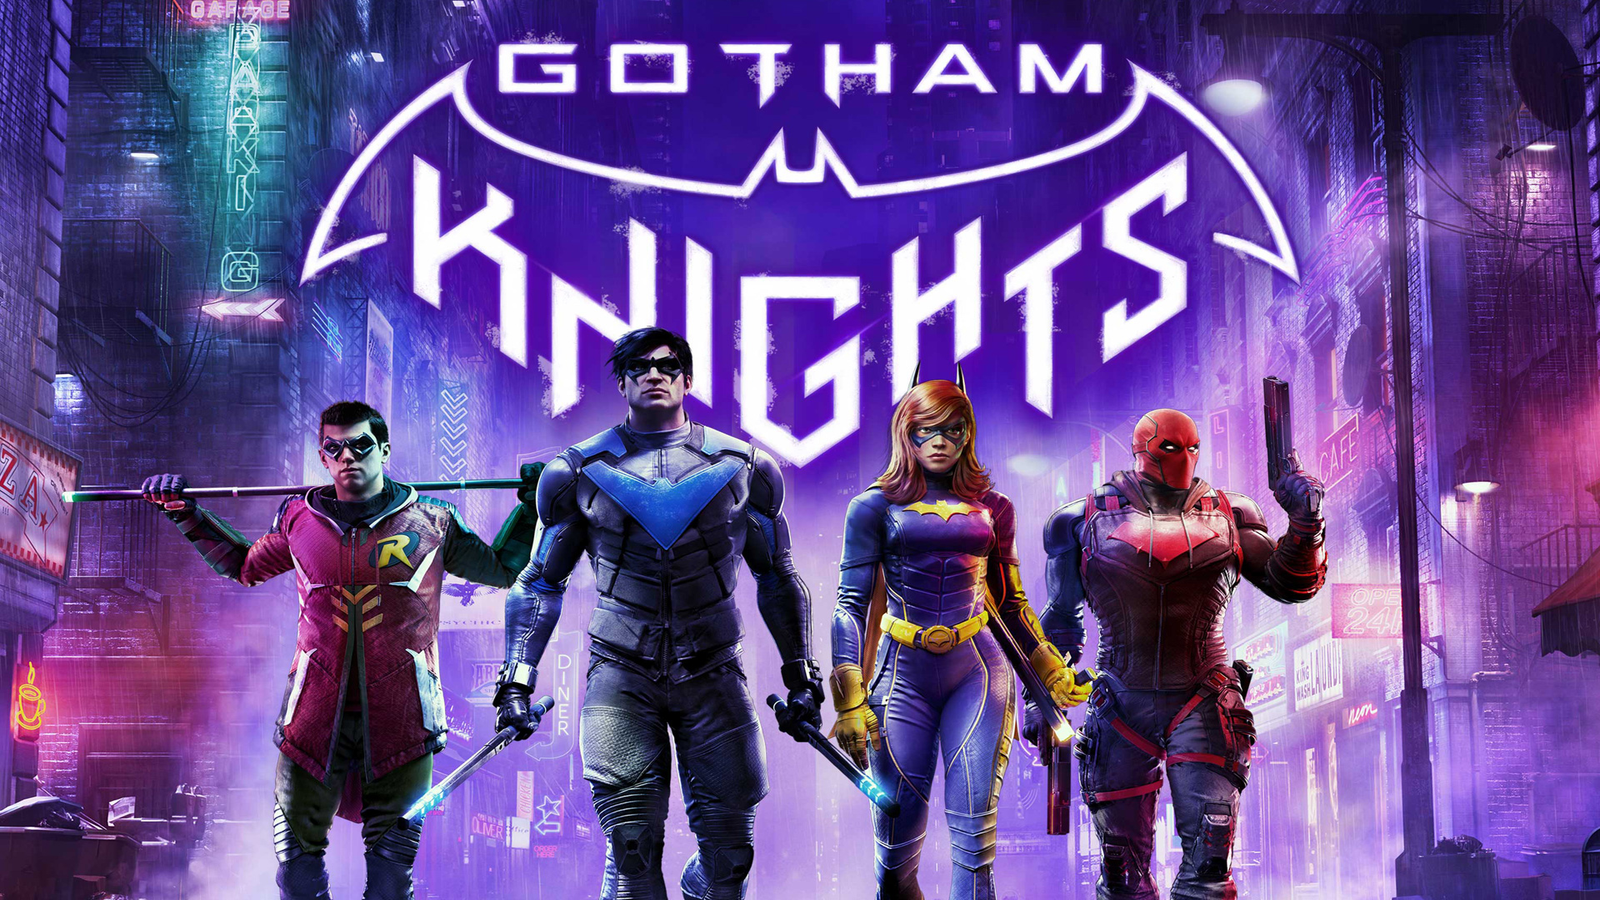 Gotham Knights has been given a late 2022 release date